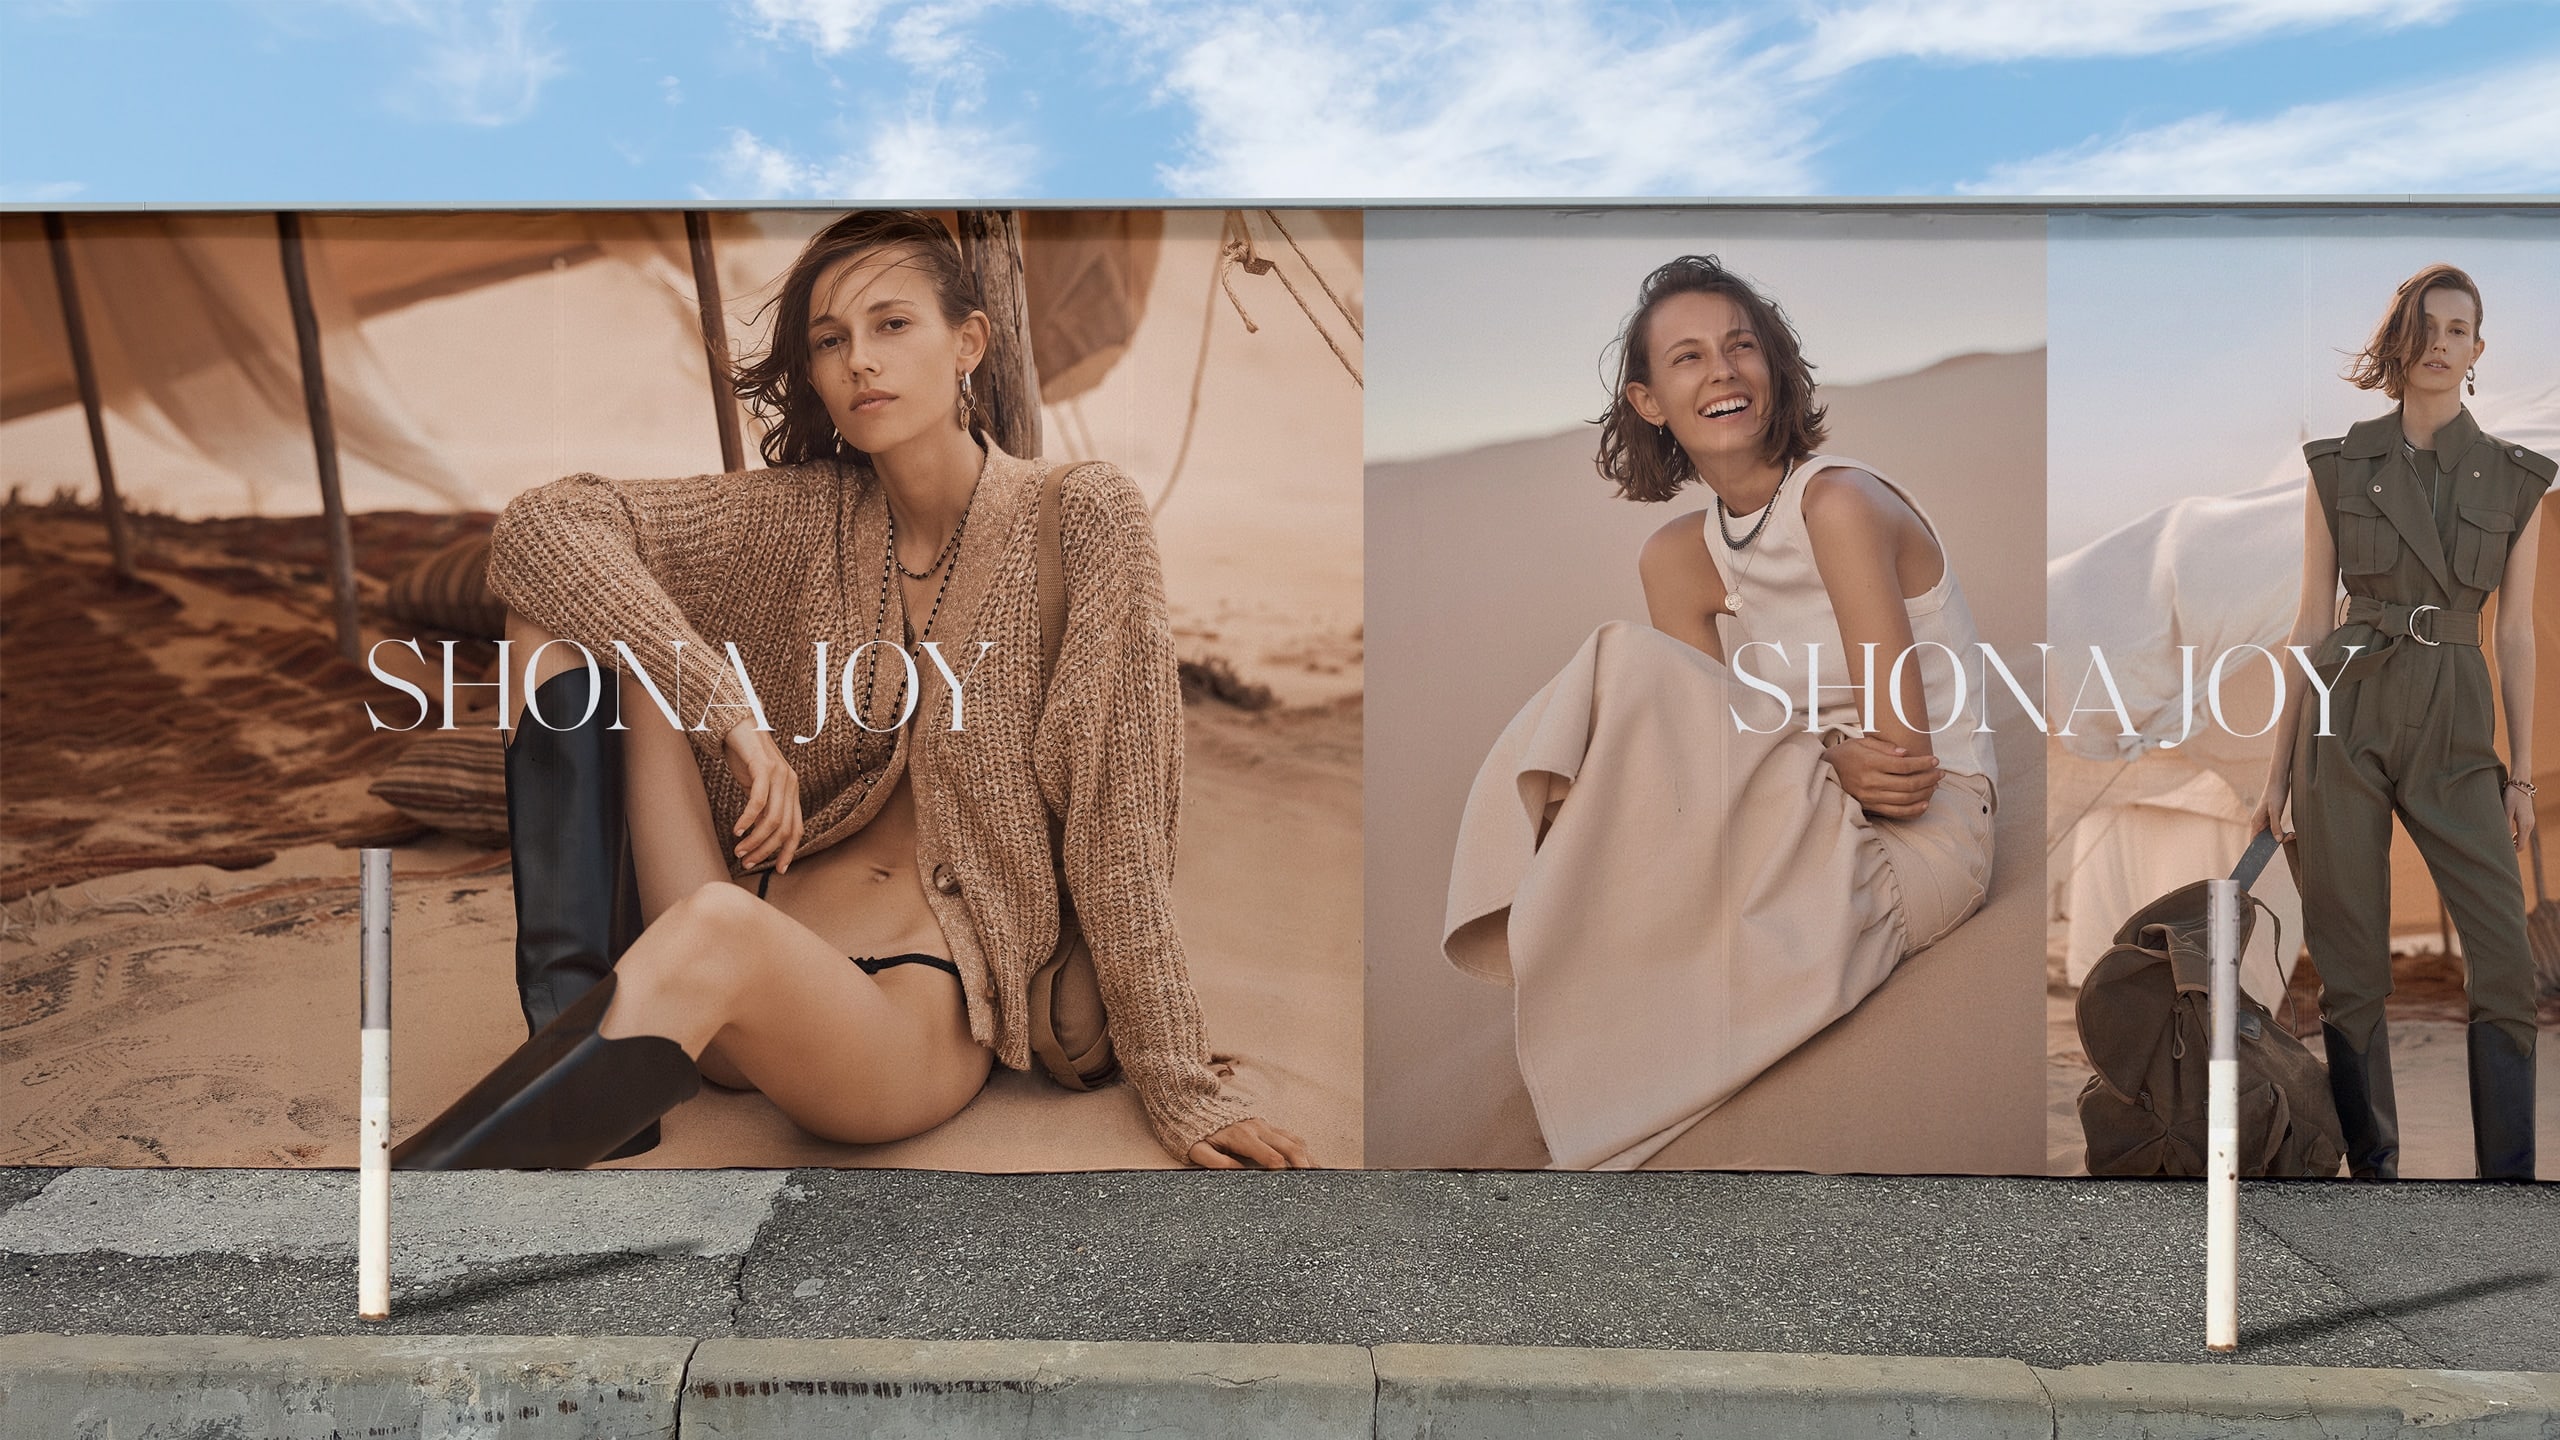 Posters on a wall showing a Shona Joy campaign. On the posters are three different photographs of a female model sitting and standing on sand dunes with a large canvas tent that is billowing in the wind in the background.